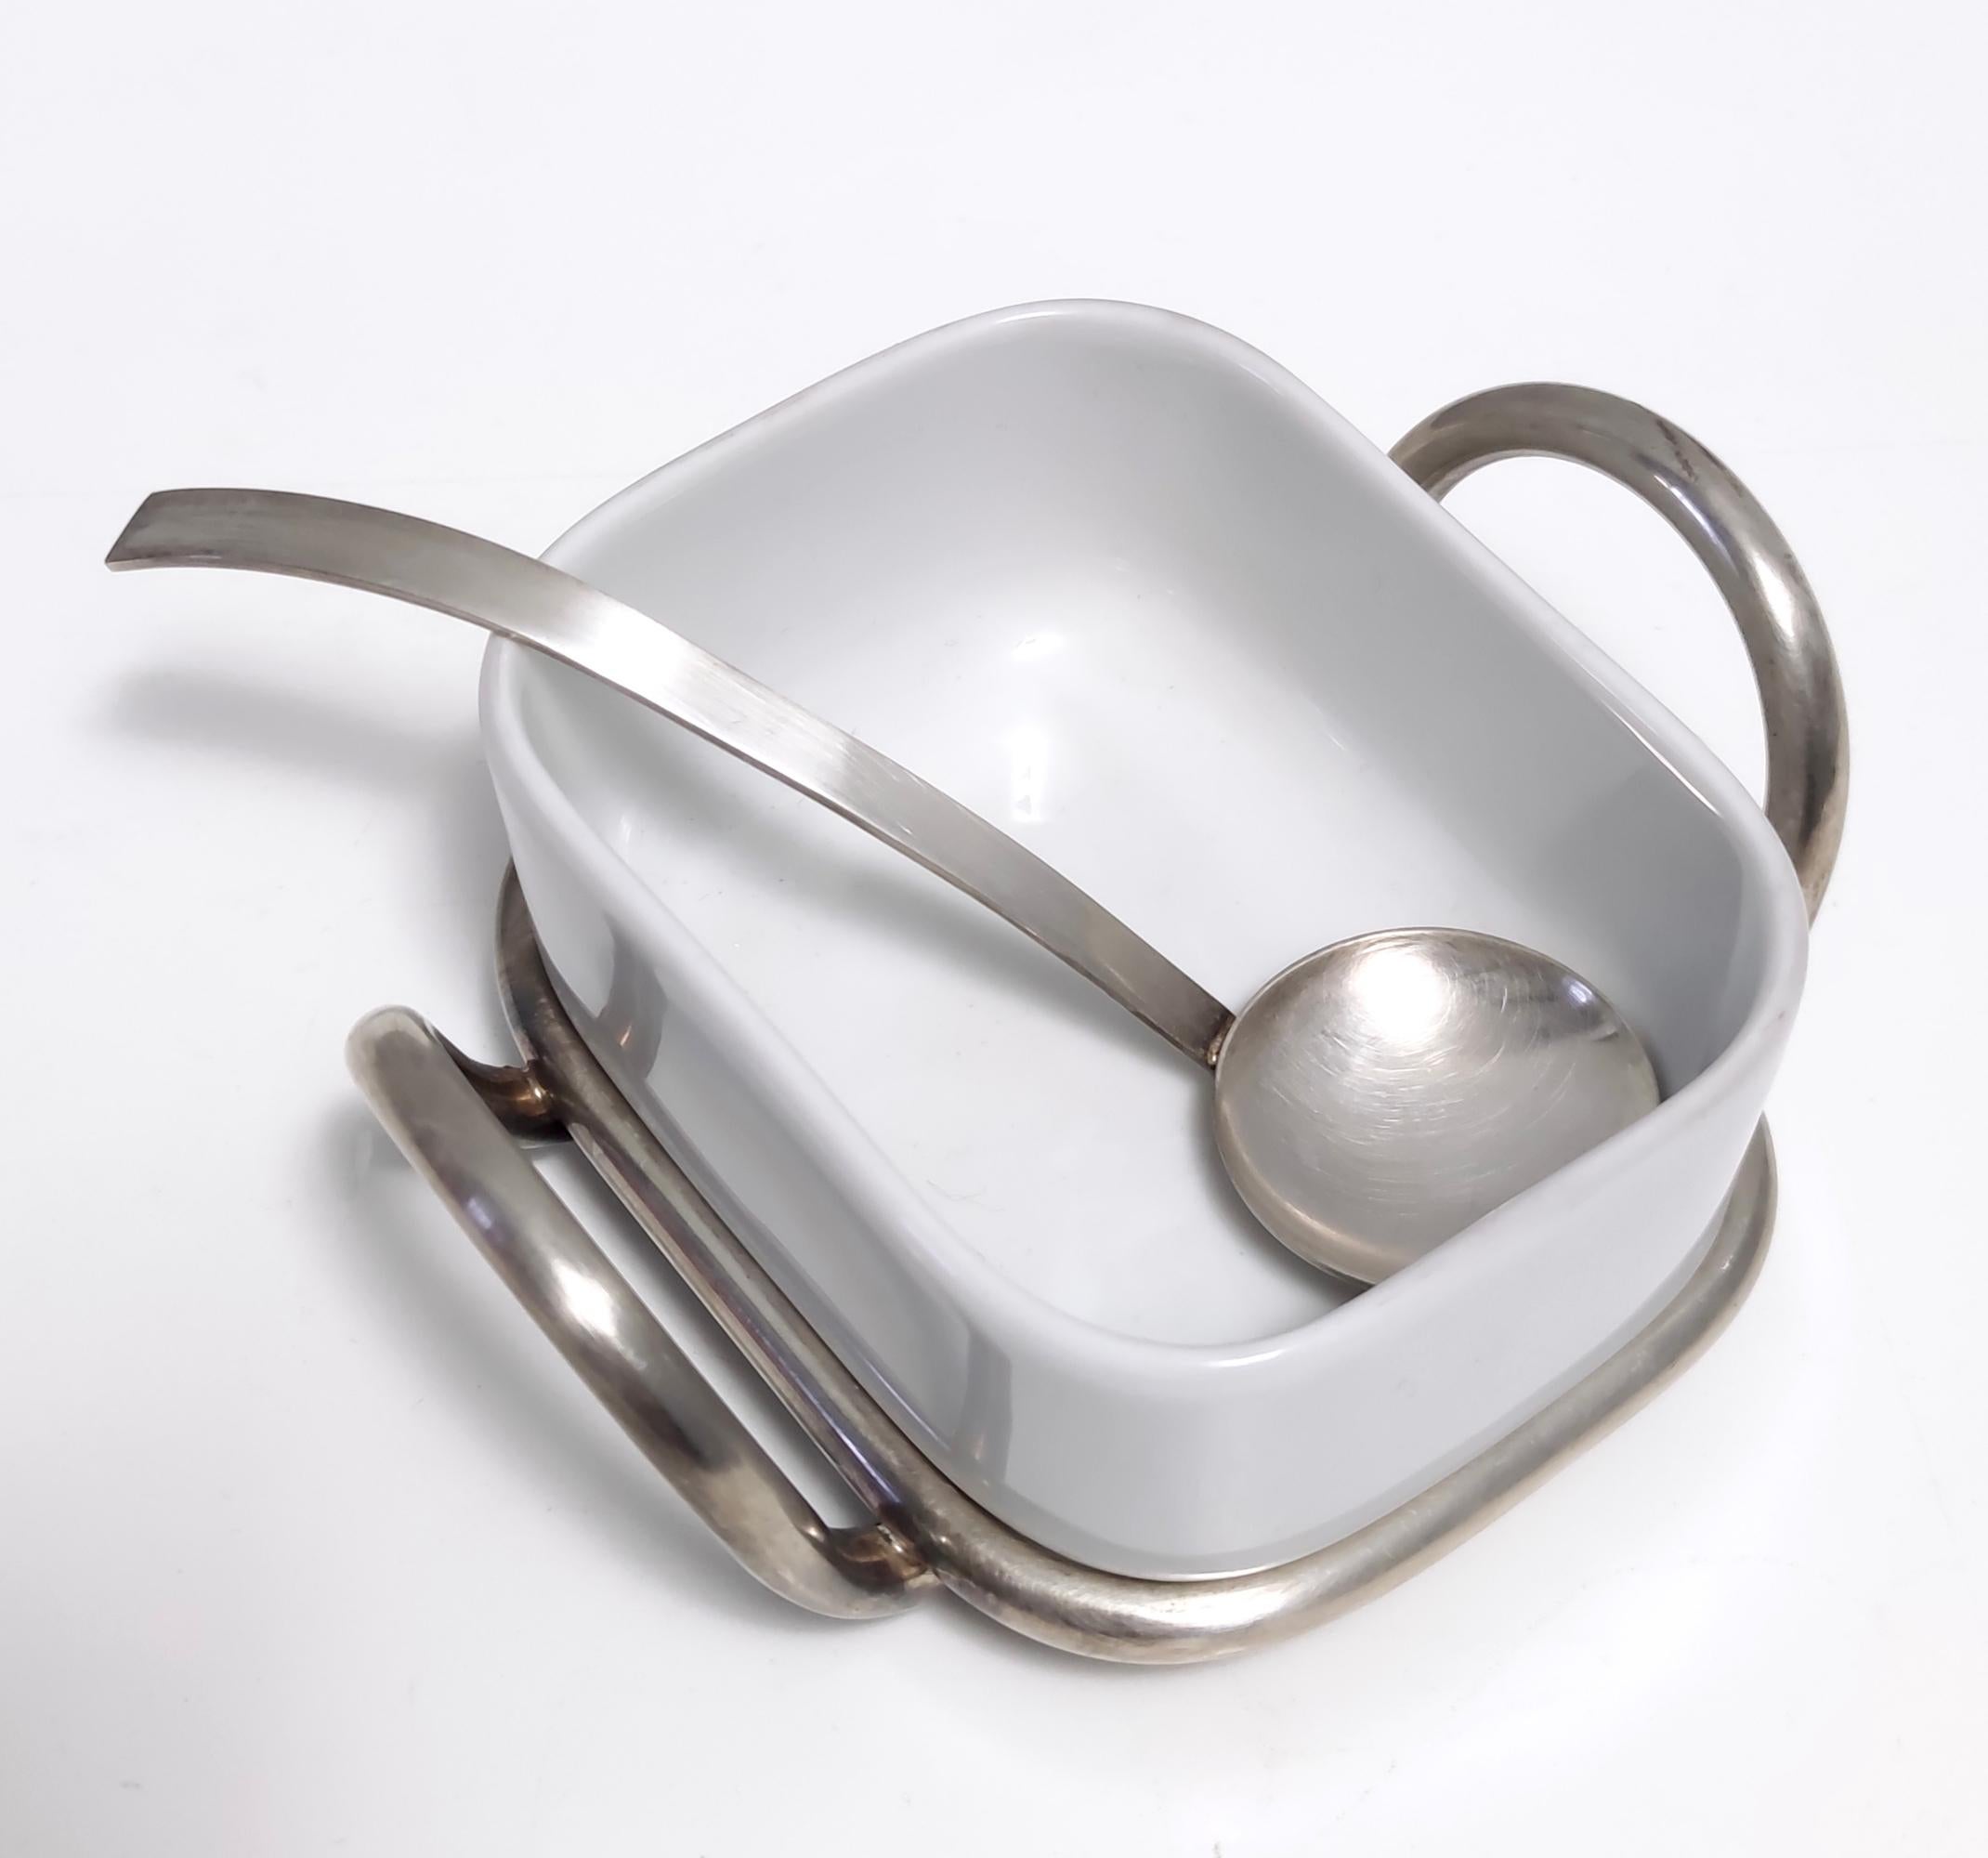 Postmodern Lino Sabattini Silver-Plated and Ceramic Cheese Bowl with Spoon 1